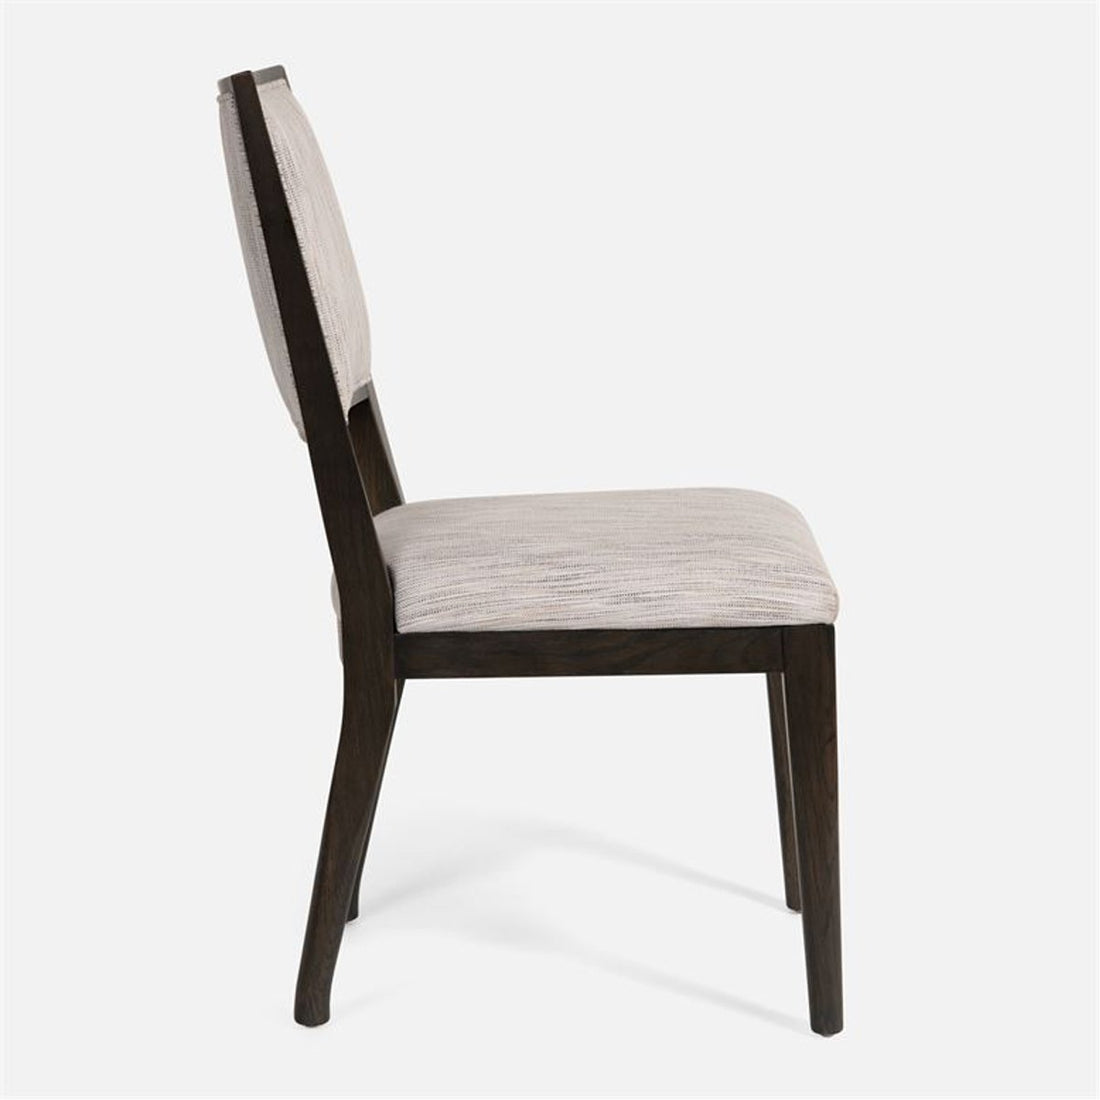 Made Goods Nelton Upholstered Dining Chair in Arno Fabric